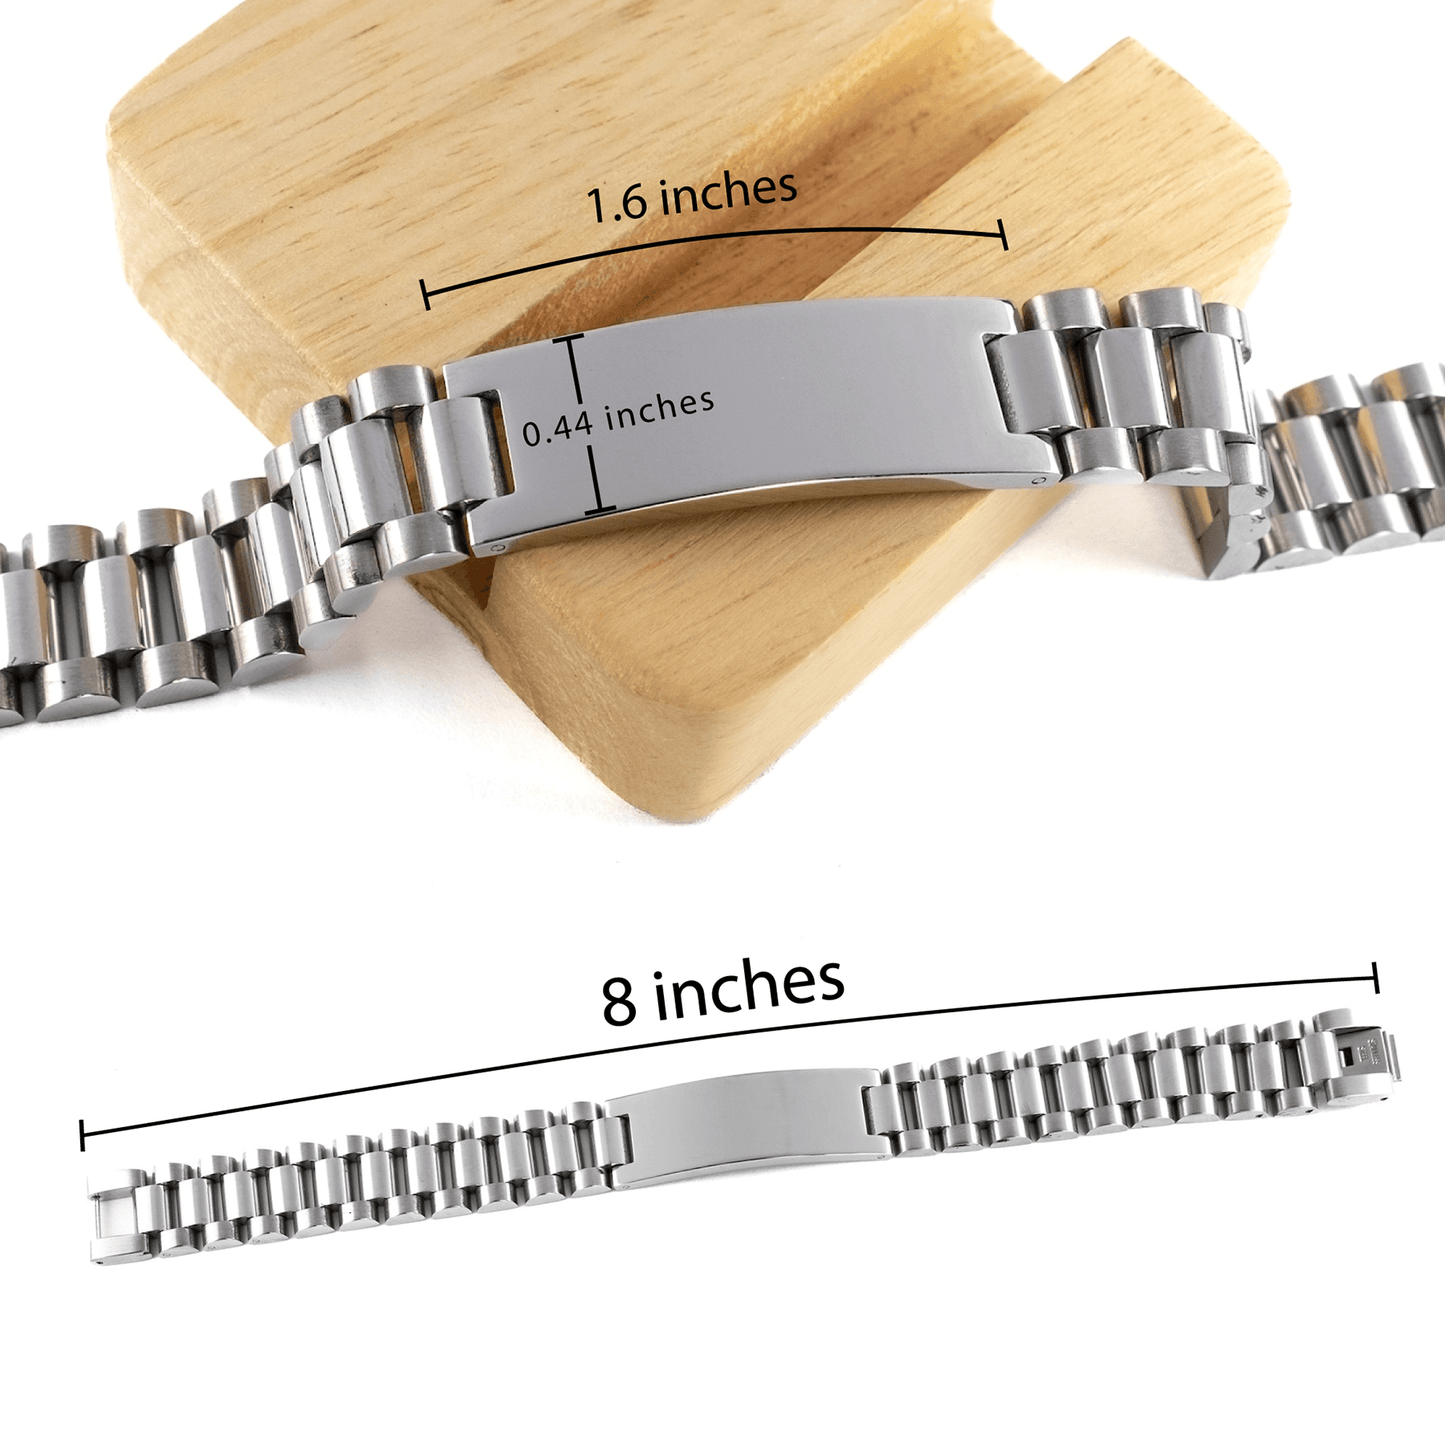 Bookbinder Ladder Stainless Steel Engraved Bracelet - Thanks for being who you are - Birthday Christmas Jewelry Gifts Coworkers Colleague Boss - Mallard Moon Gift Shop